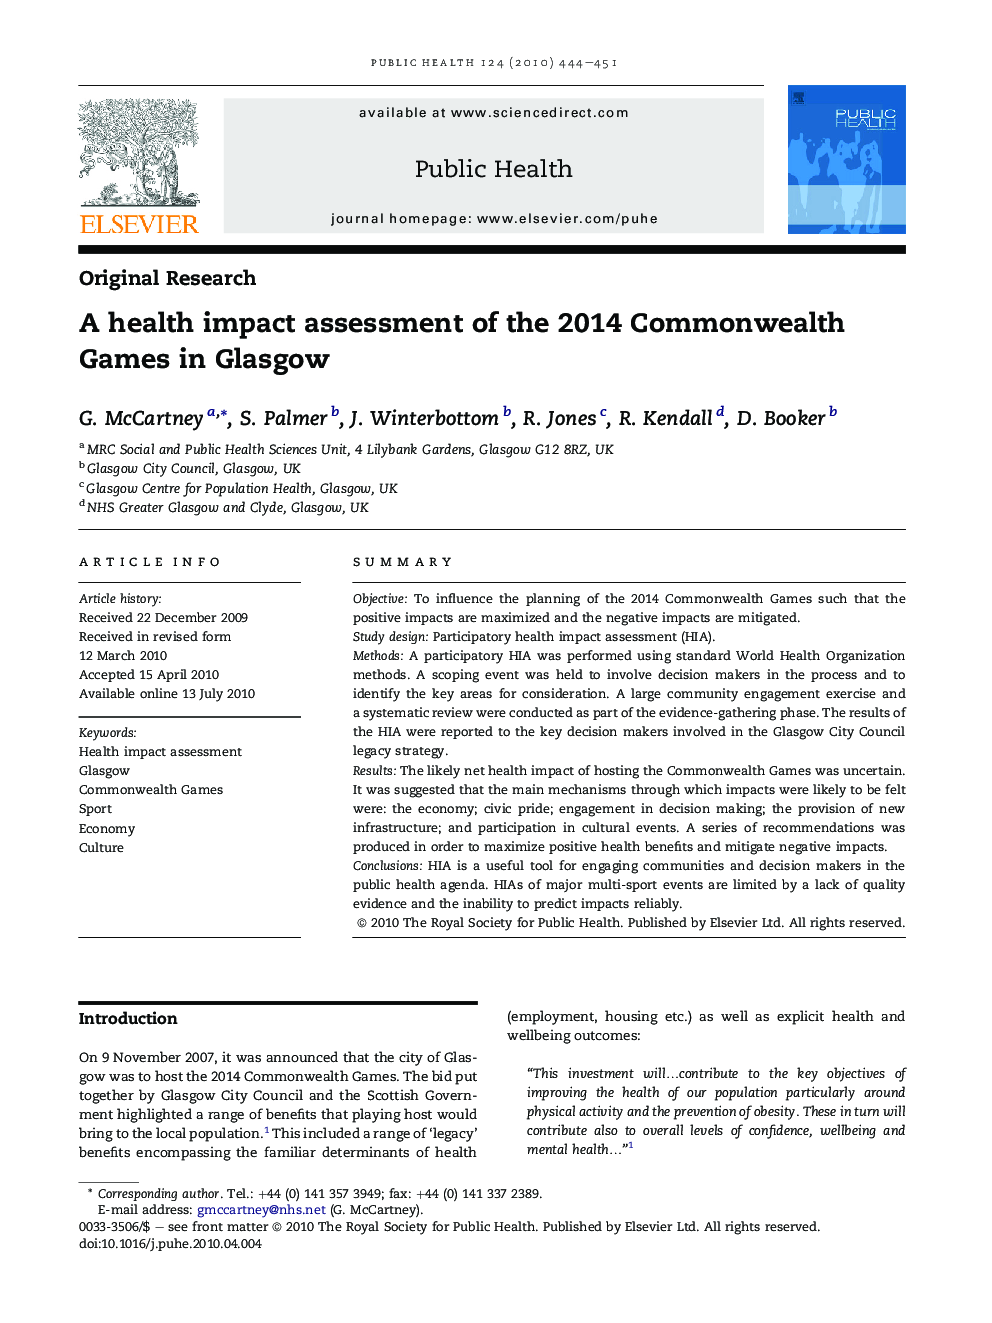 A health impact assessment of the 2014 Commonwealth Games in Glasgow